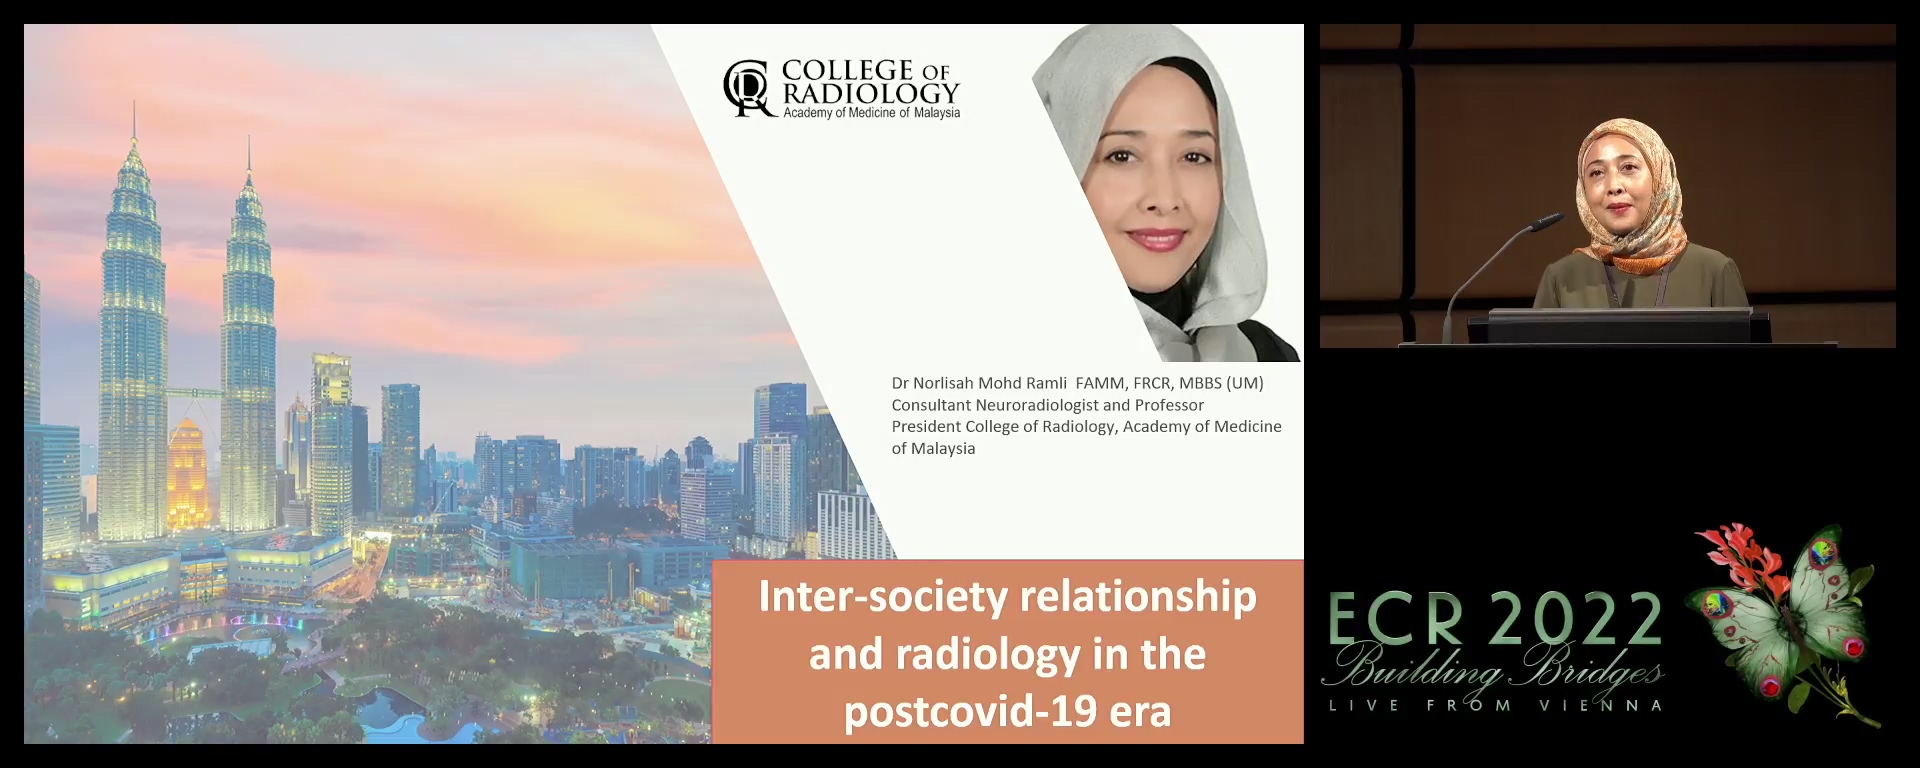 Chairperson's introduction: Inter-society relationship and radiology in the post-COVID-19 era